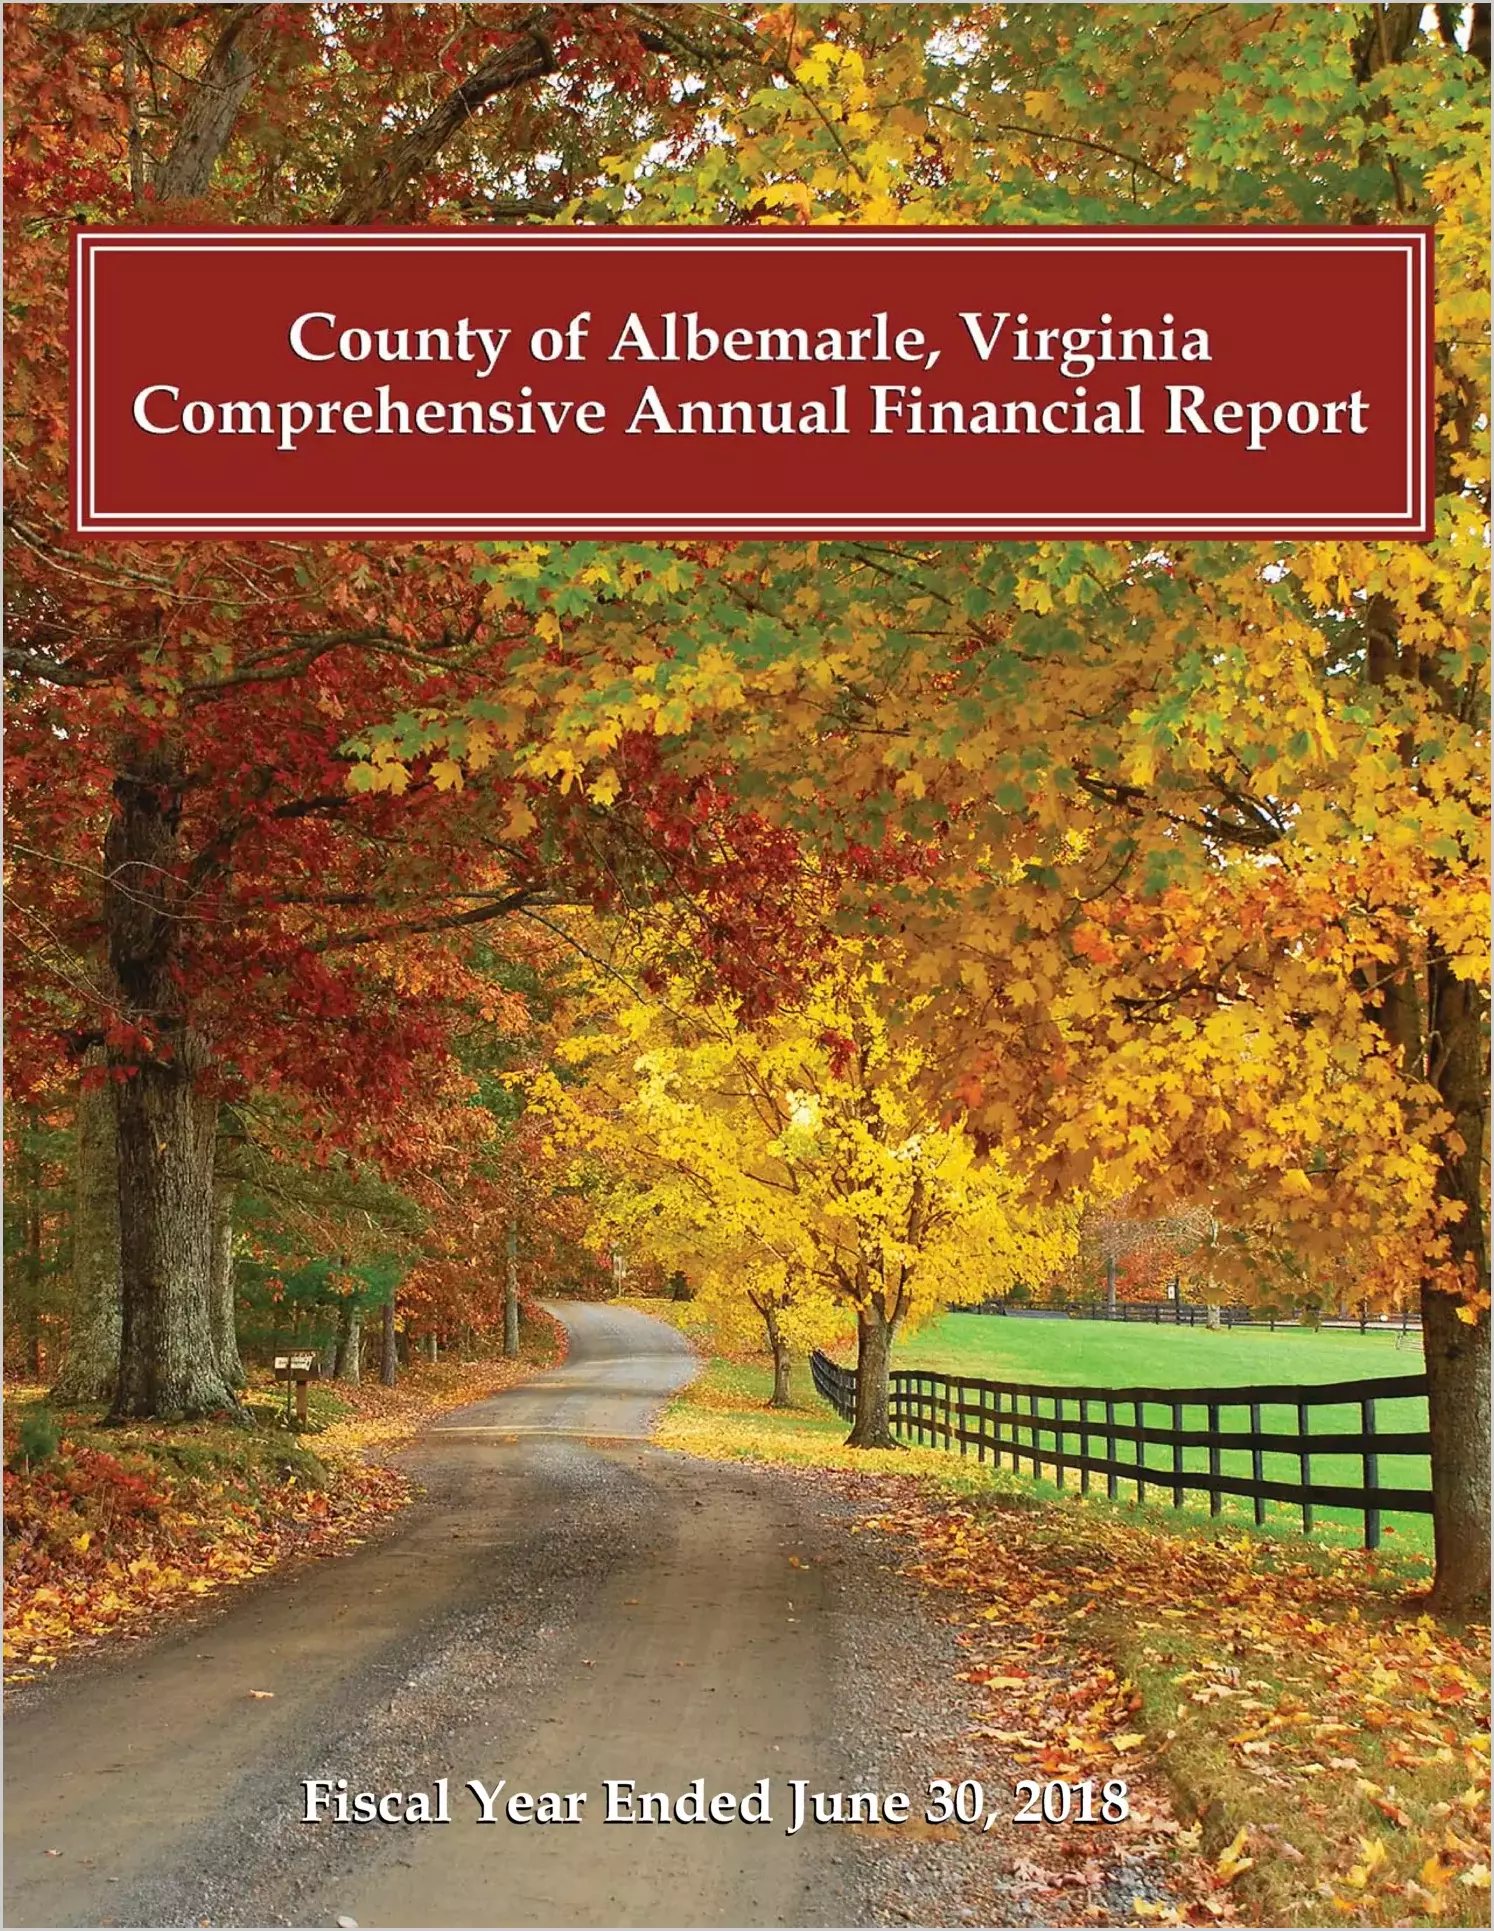 2018 Annual Financial Report for County of Albemarle